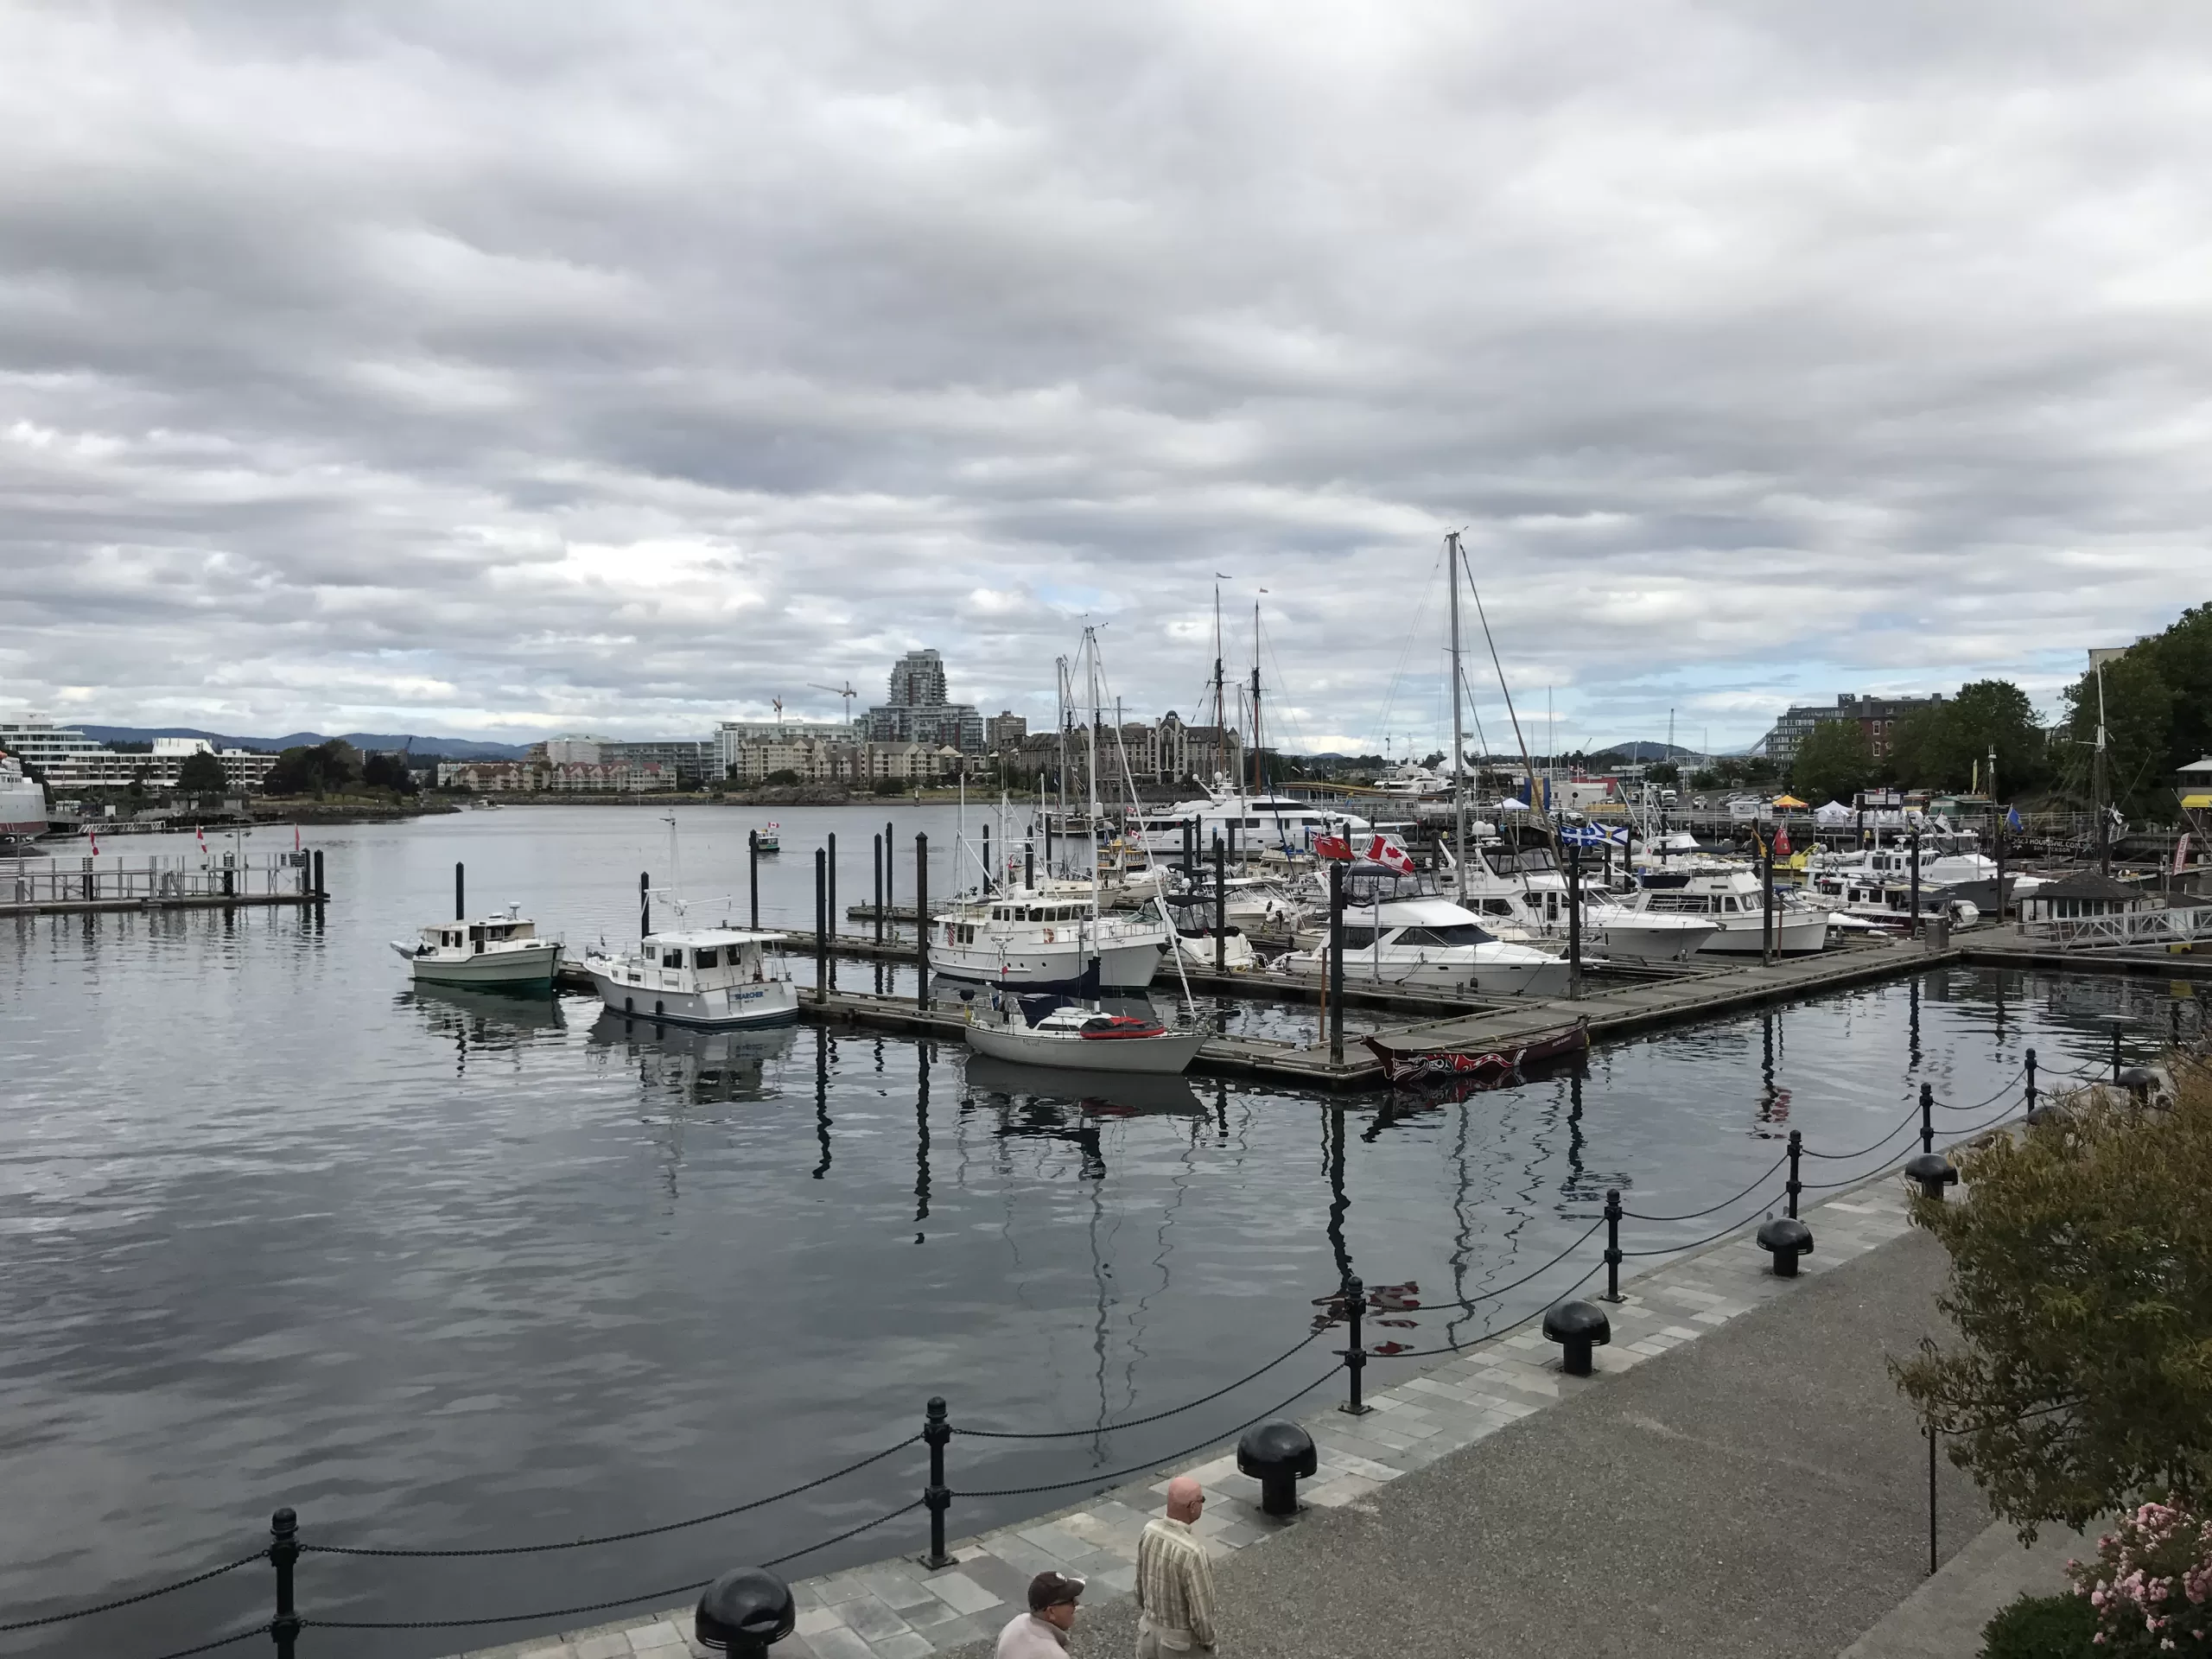 Some docks with boats attached in Victoria Harbour on an overcast day.